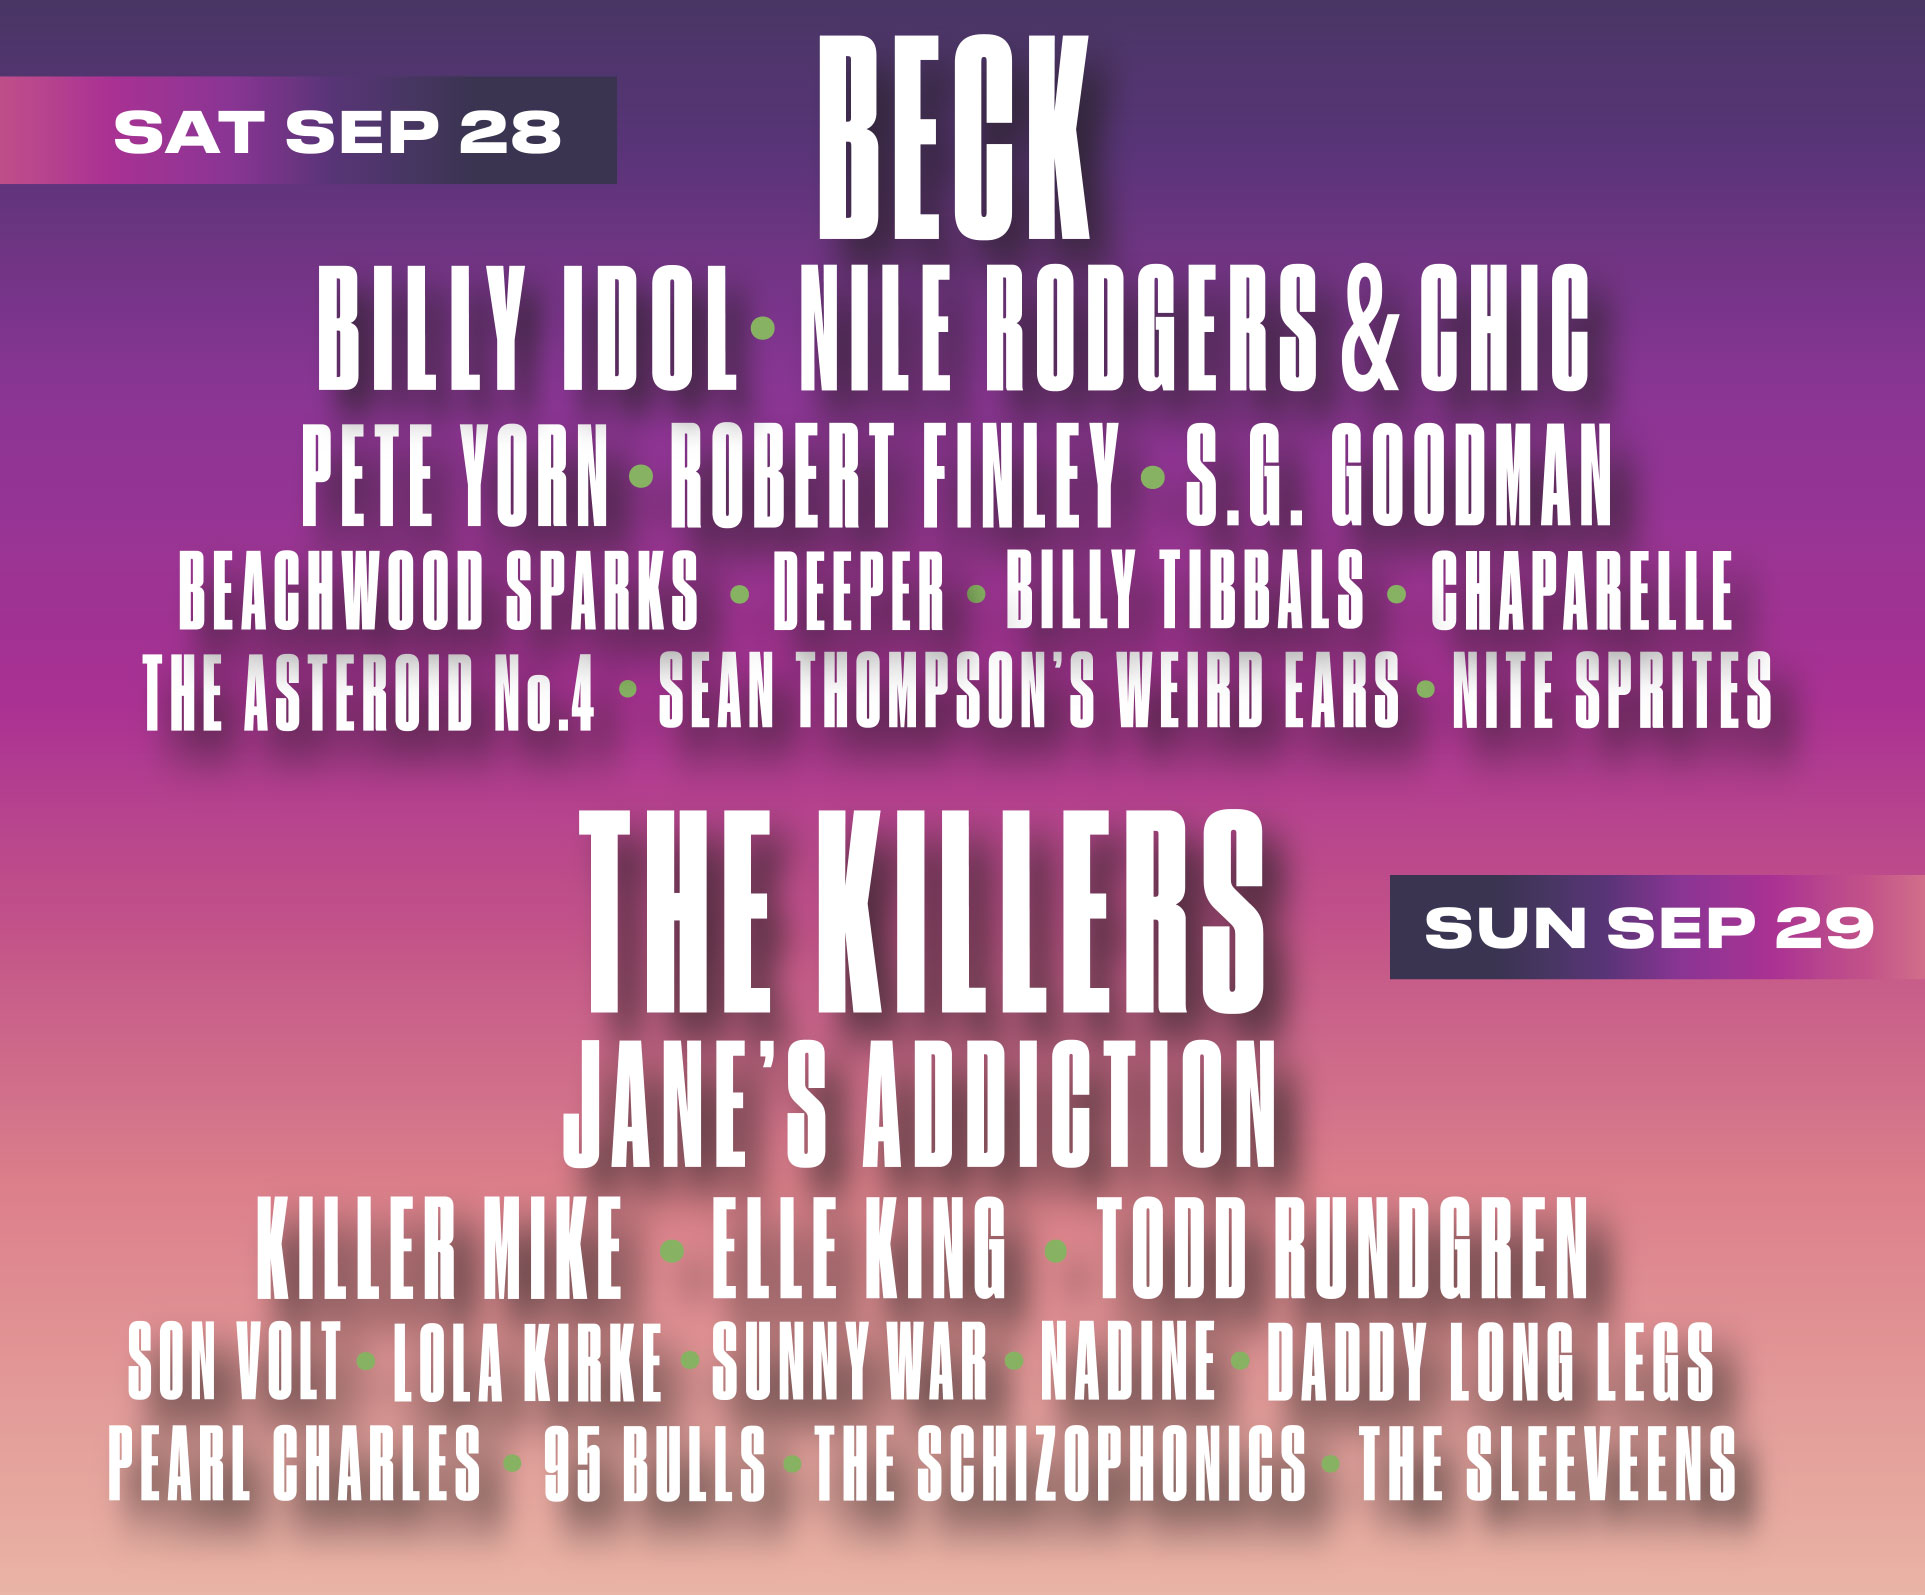 Lineup featuring, The Killers, Beck, Billy Idol, Jane's Addiction, Nile Rodgers + Chic, Killer Mike, Elle King, Todd Rundgren, Pete Yorn, Son Volt, Robert Finley, S.g. Goodman, Lola Kirke, The Sleveens, Tre Burt, Beachwood Sparks, Sunny War, Billy Tibbals Band, Chaparelle, Pearl Charles, 95 Bulls, The Asteroid No 4, The Schizophonics, Nadine, Daddy Long Legs, Sean Thompsons Weird Ears, and Nite Sprites. Plus Enjoy Culinary Experiences, Cocktails, Art, Marketplace, Beer Garden and More.